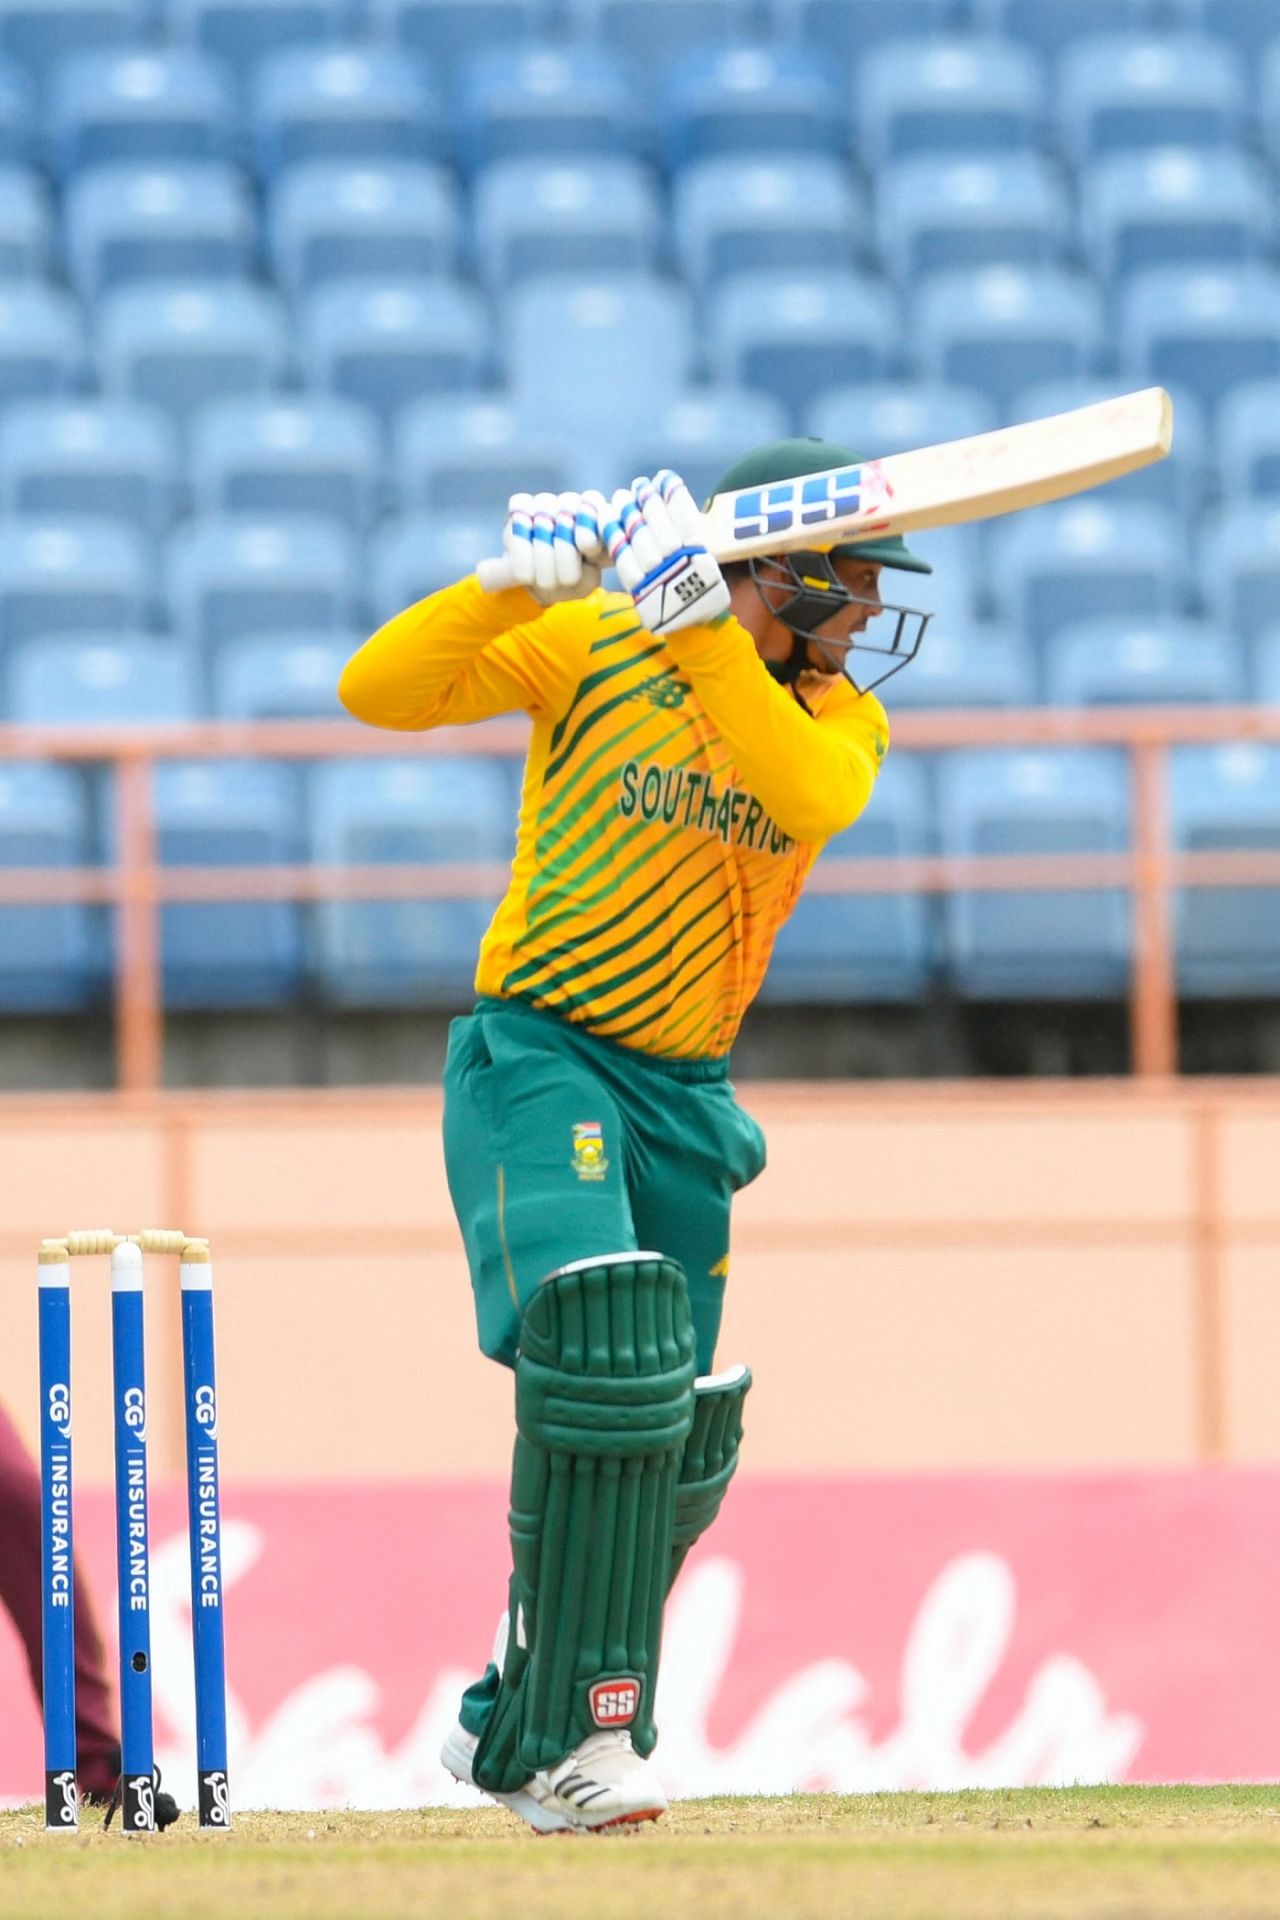 Quinton de Kock tucks one to the off side, West Indies vs South Africa, 1st T20I, St George's, June 26, 2021